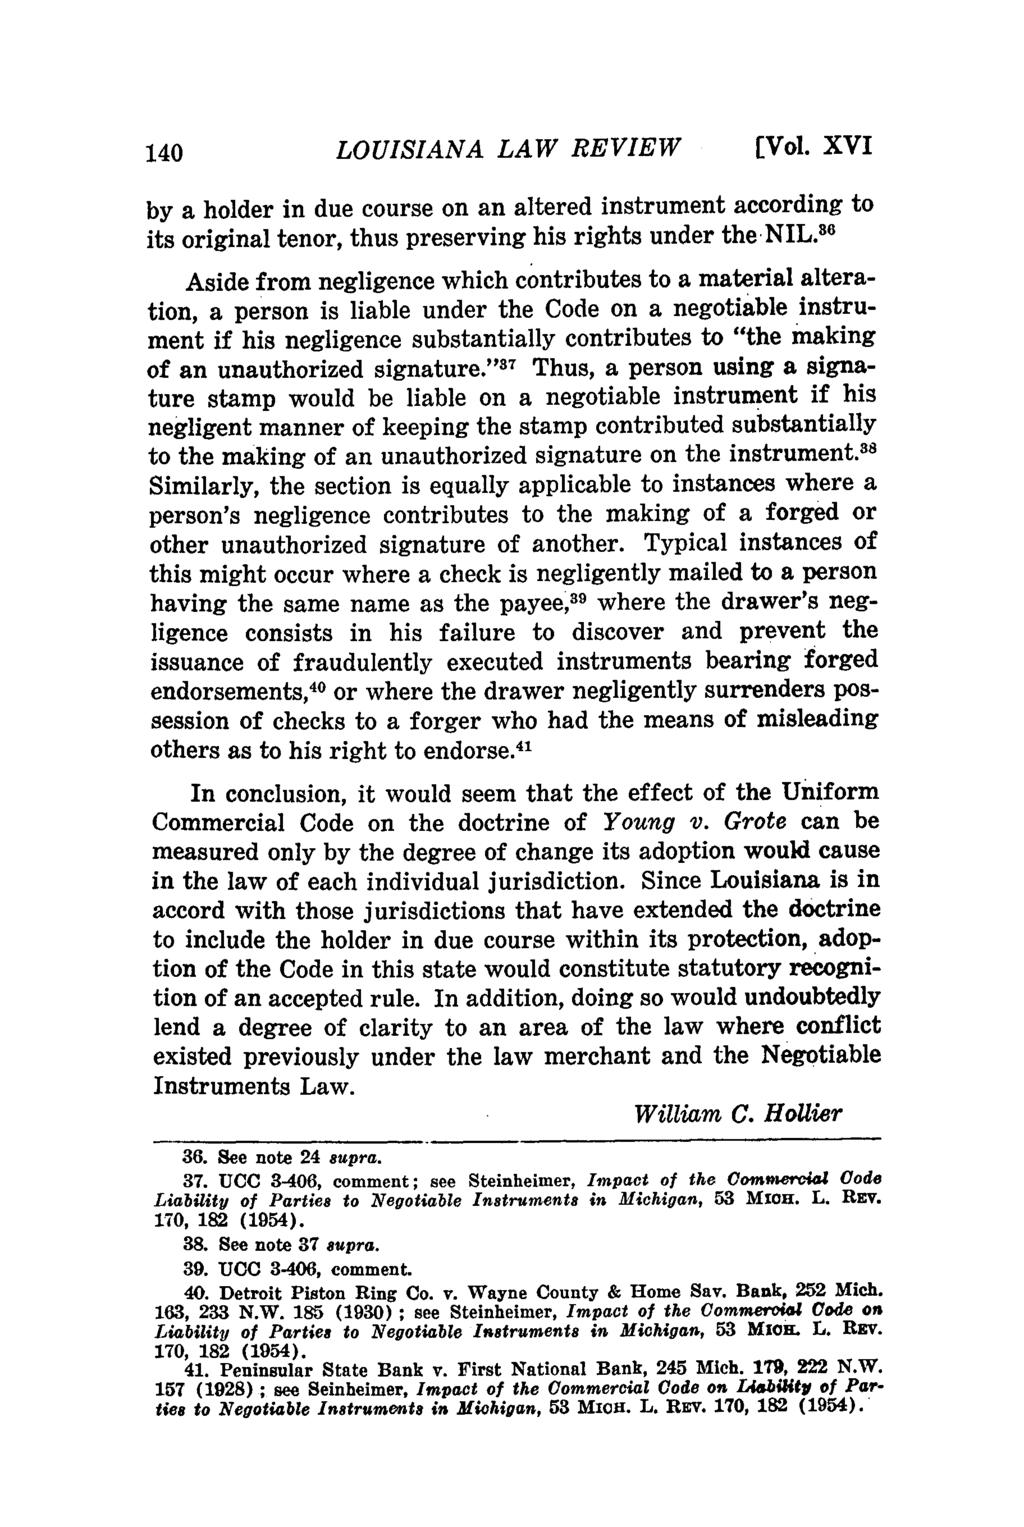 LOUISIANA LAW REVIEW (Vol. XVI by a holder in due course on an altered instrument according to its original tenor, thus preserving his rights under thenil.